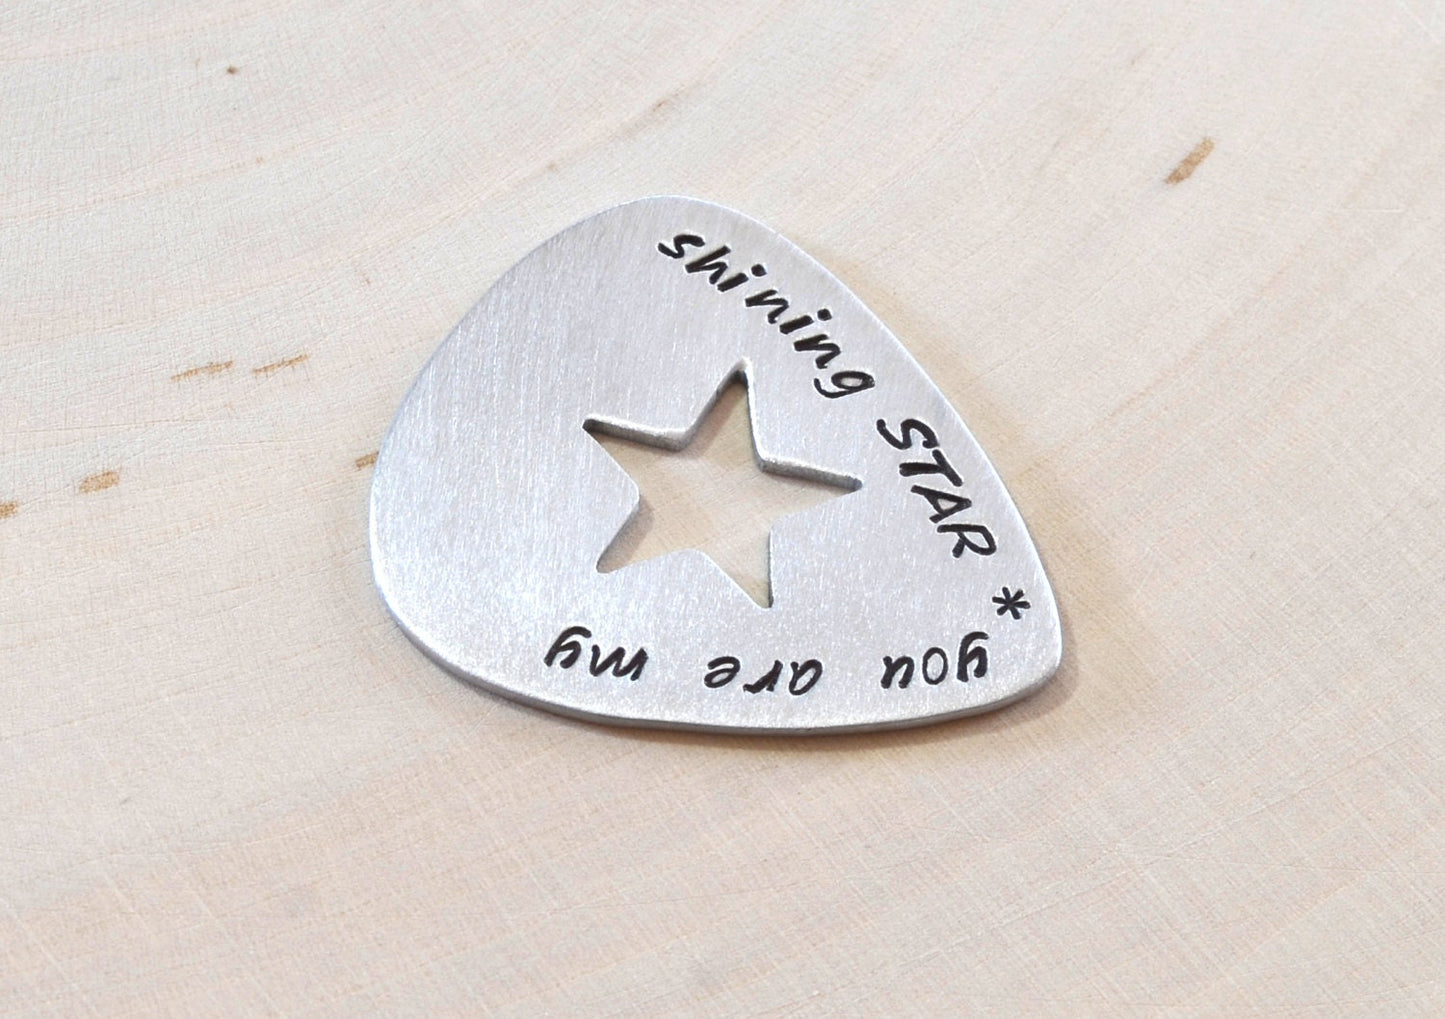 Guitar pick for your shining star in aluminum